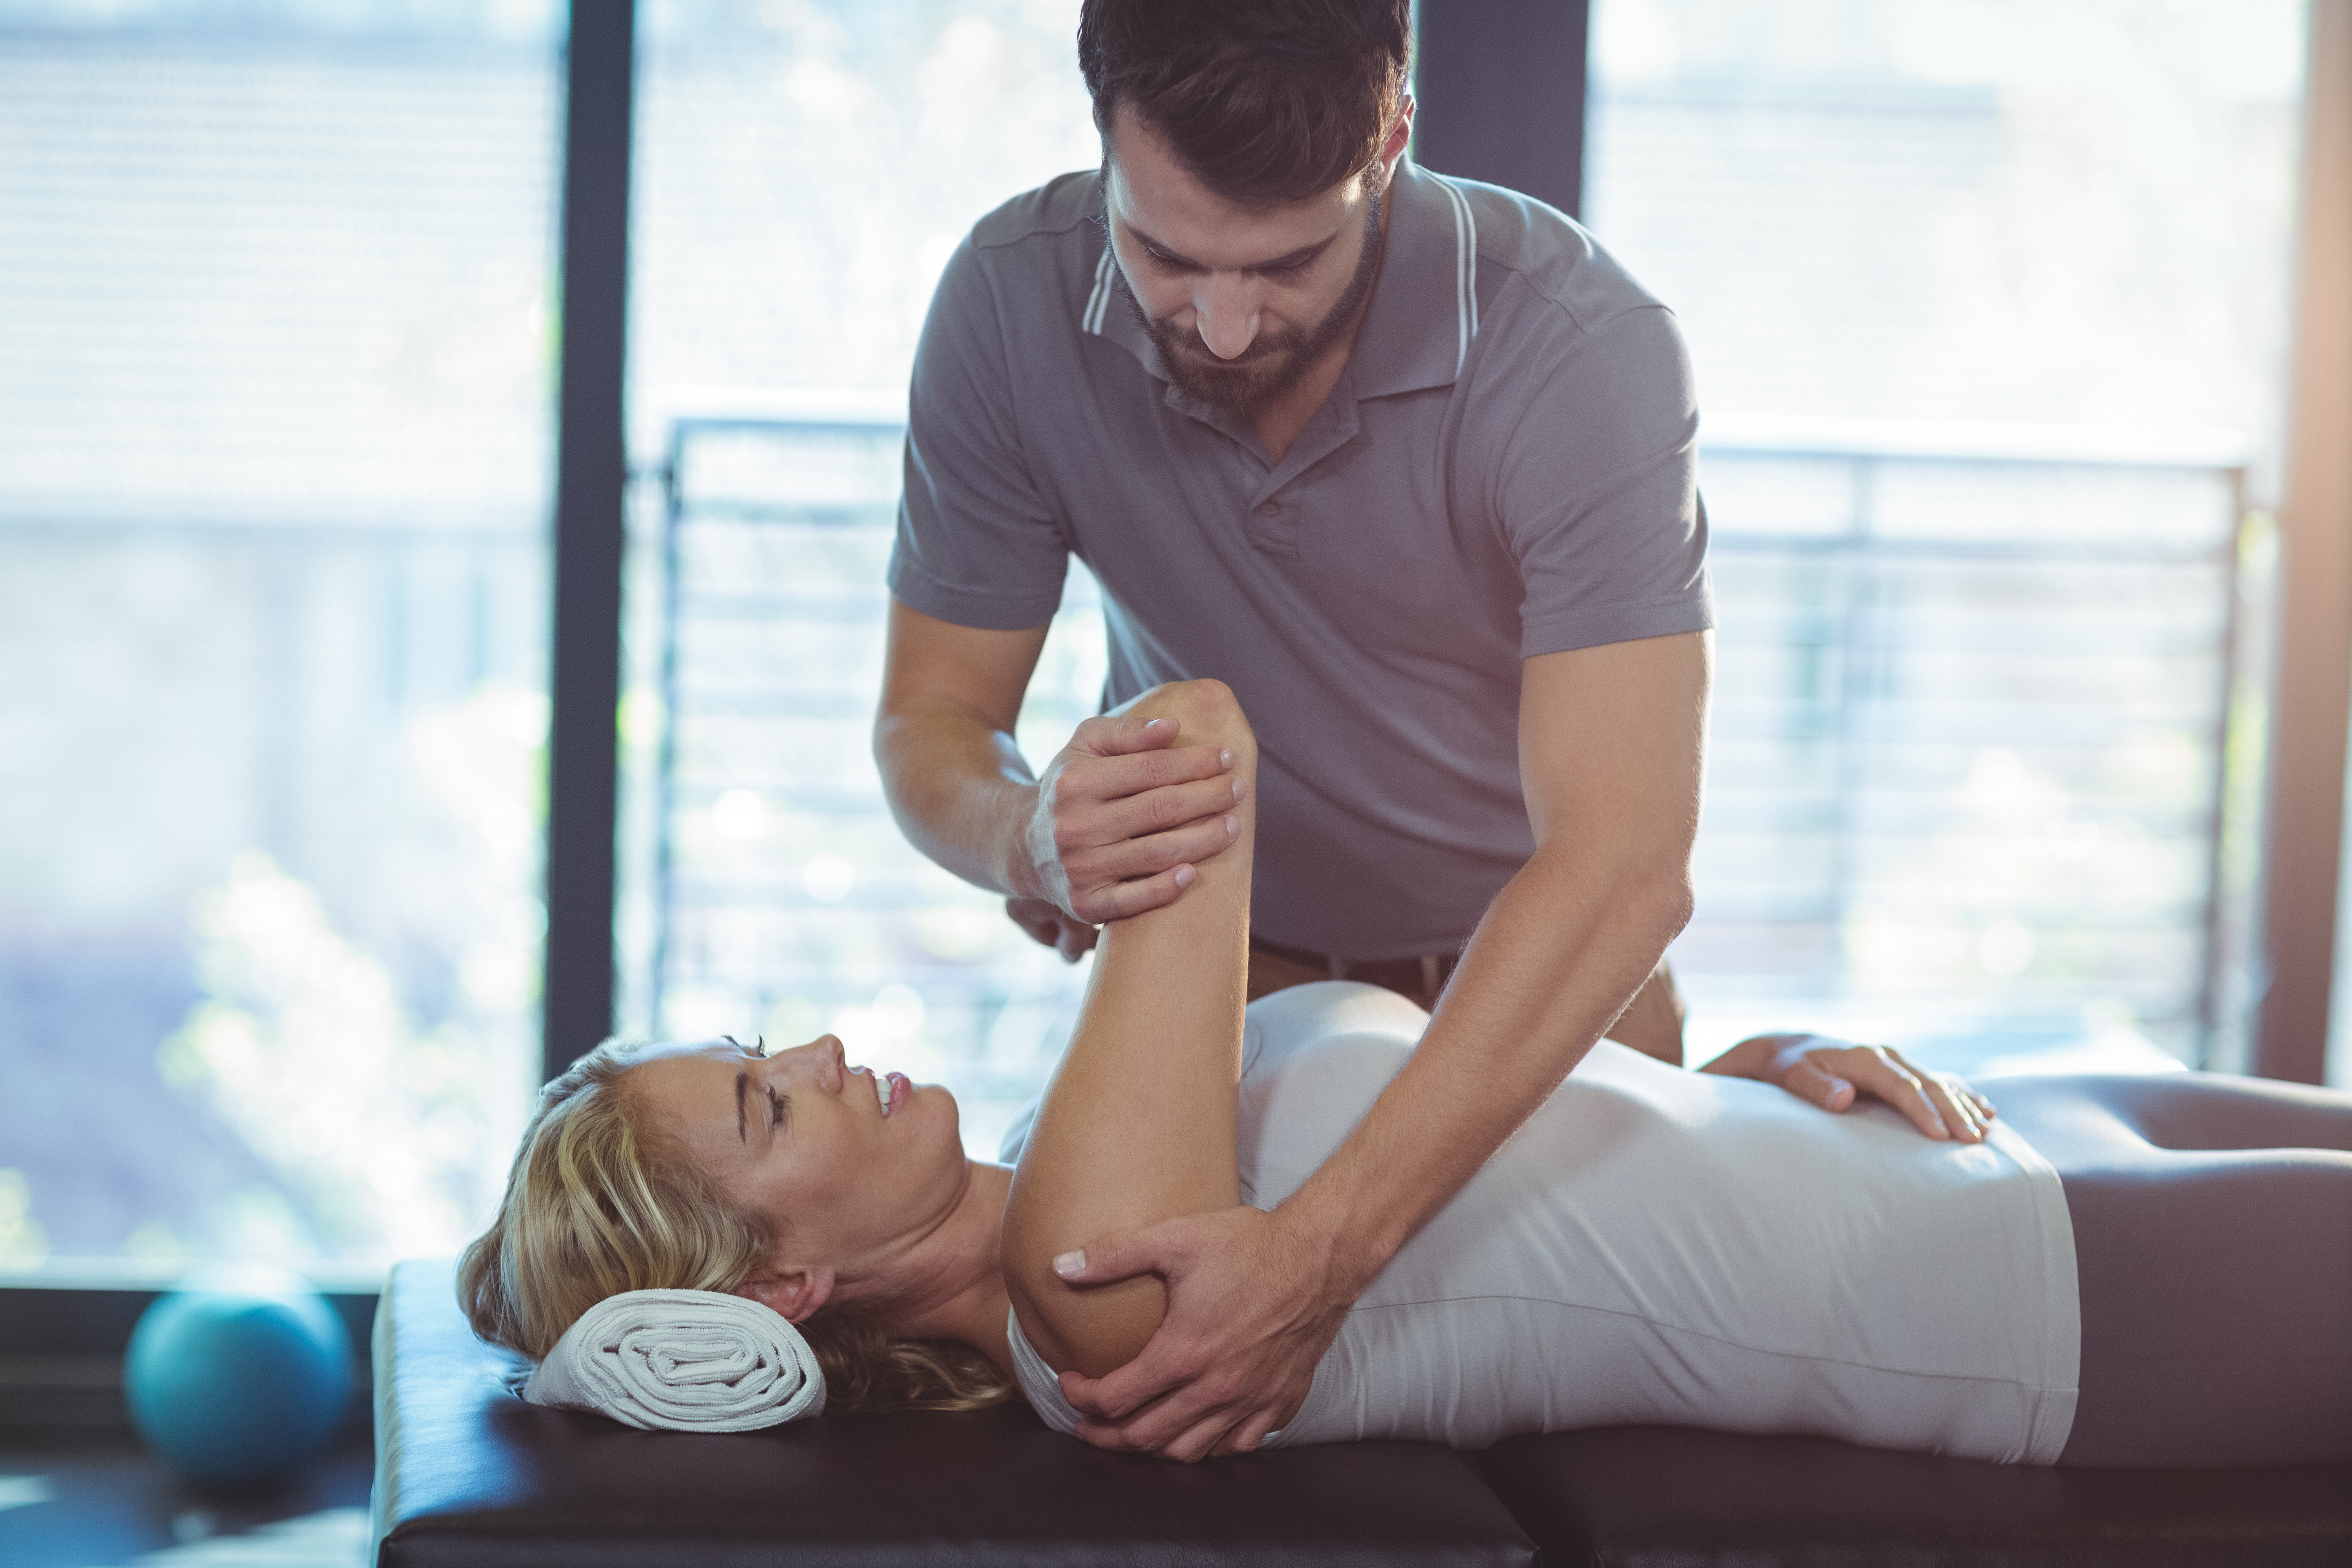 Physical therapy helps delay or eliminate the need for surgery